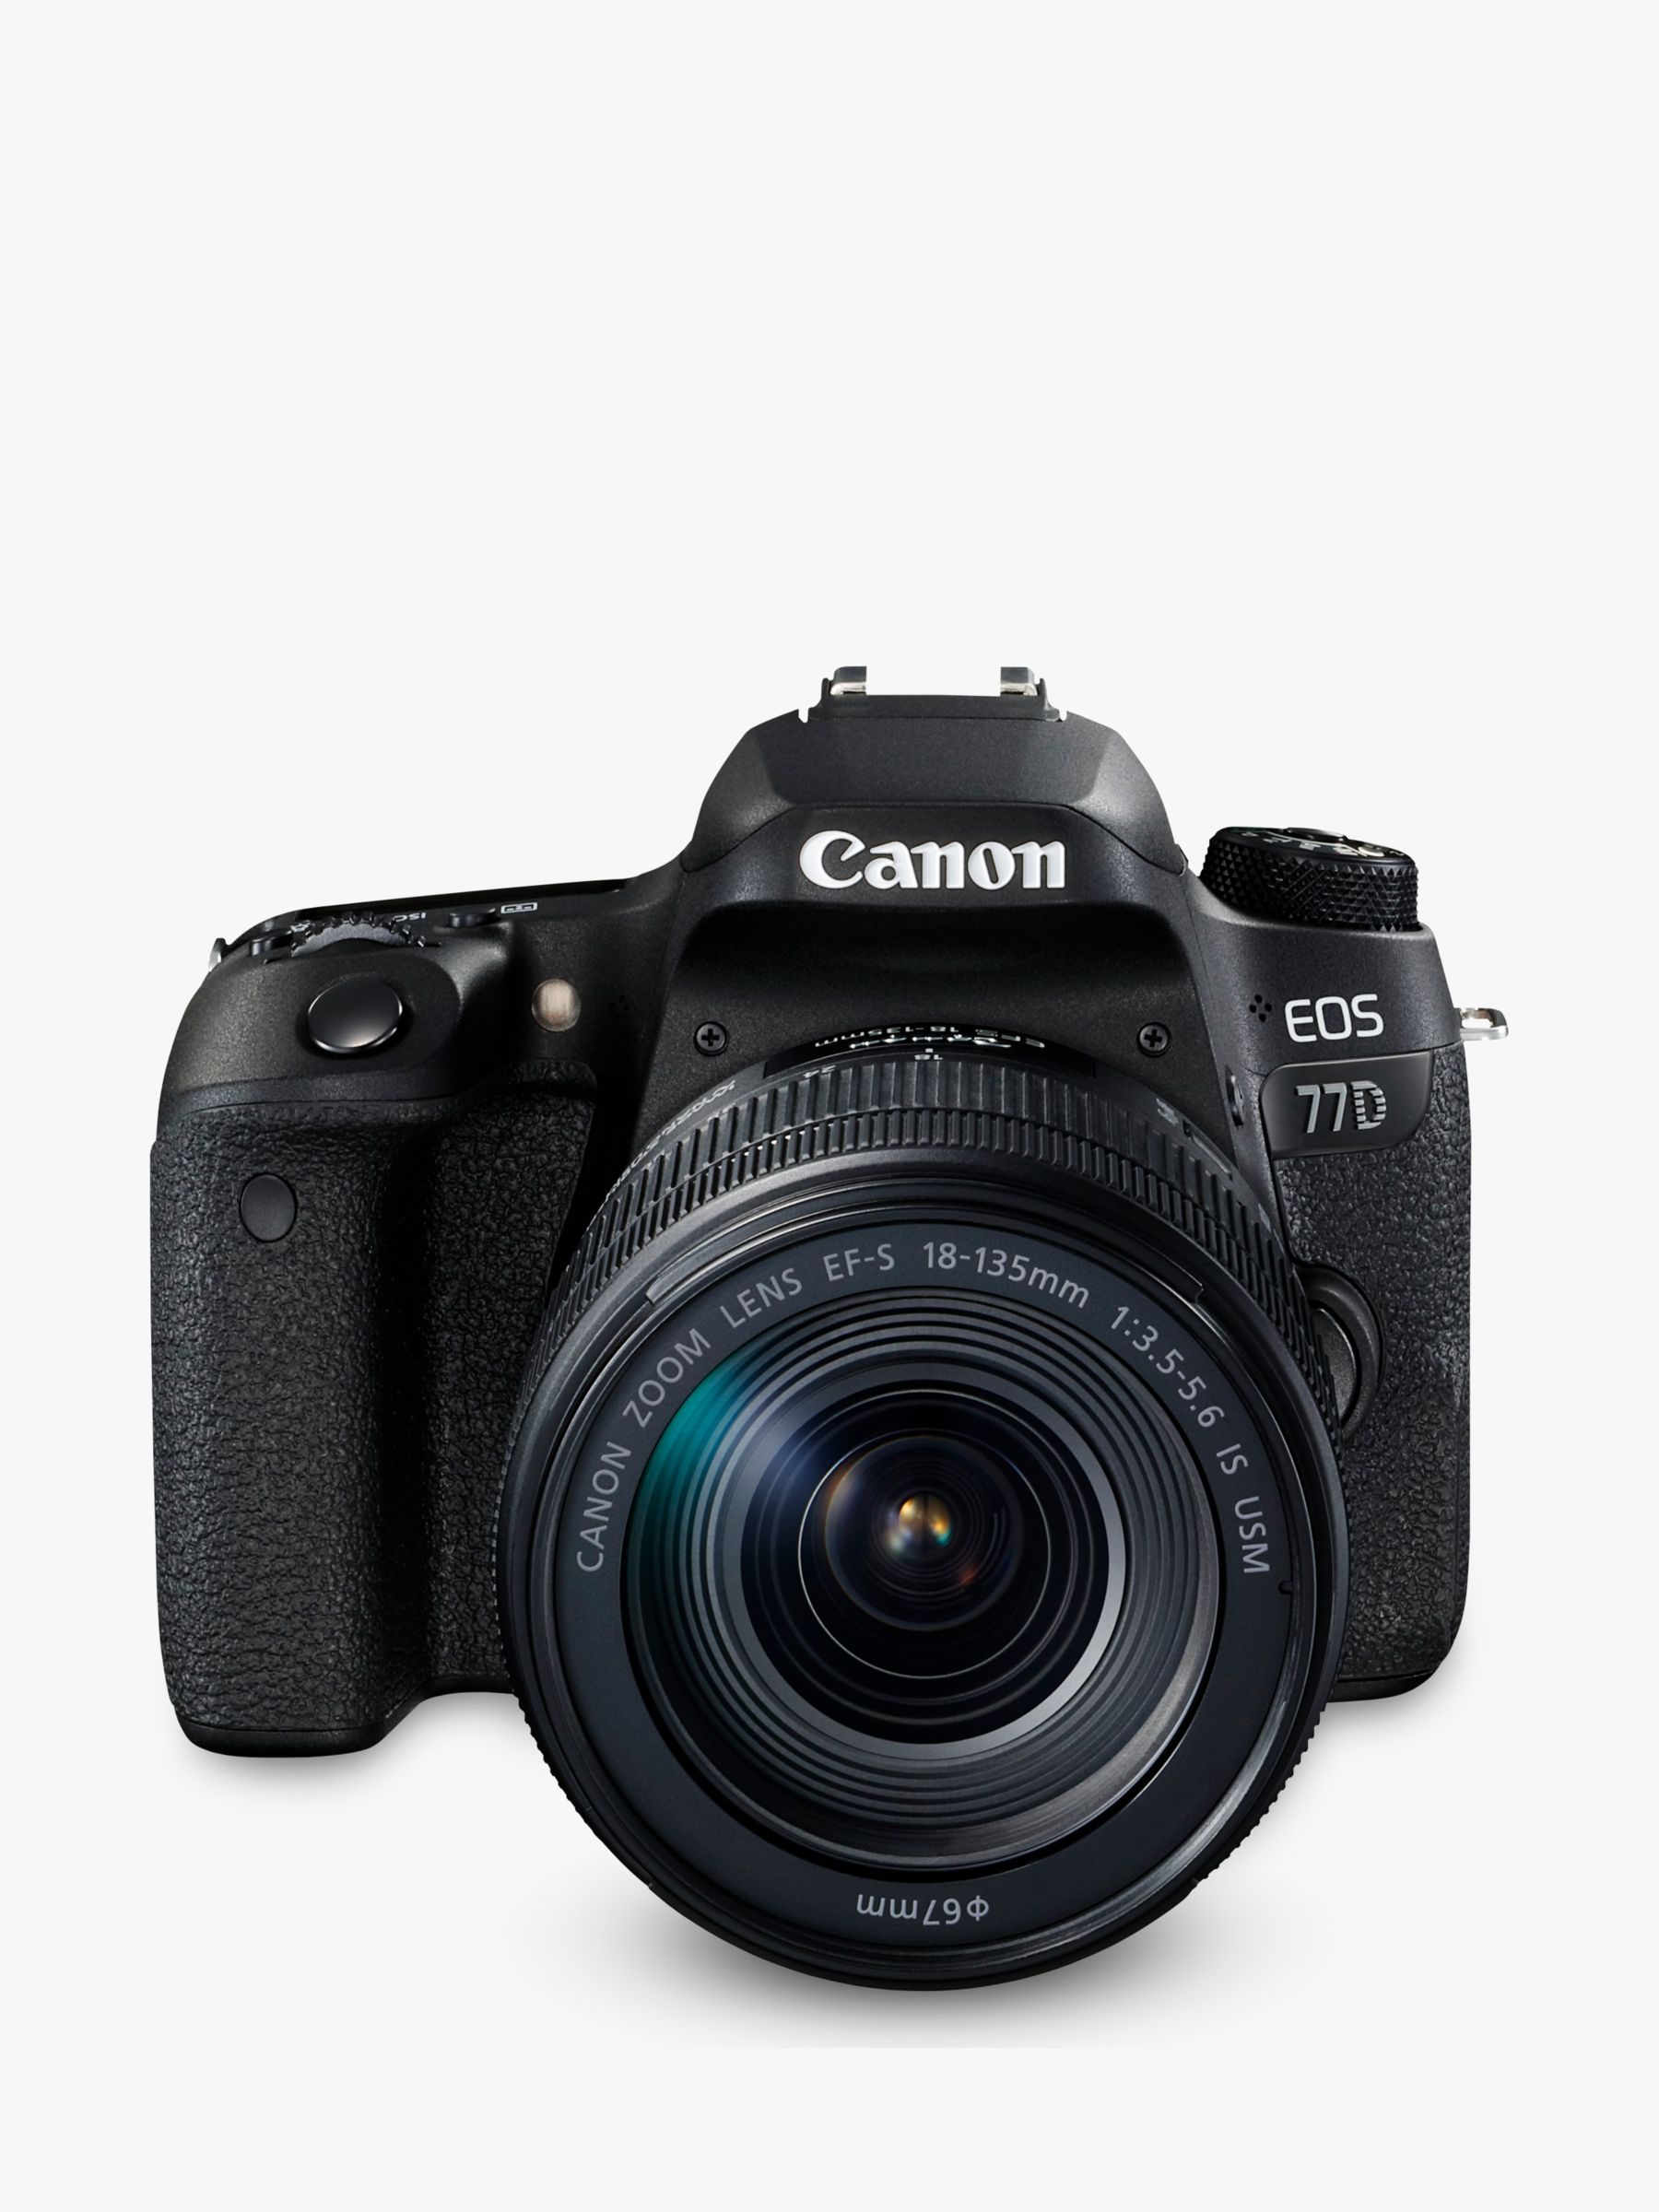 Canon EOS 77D Digital SLR Camera with EF-S 18-135mm IS USM Lens, HD 1080p, 24.2MP, Wi-Fi, Bluetooth, NFC, Optical Viewfinder, 3 Vari-Angle Touch Screen